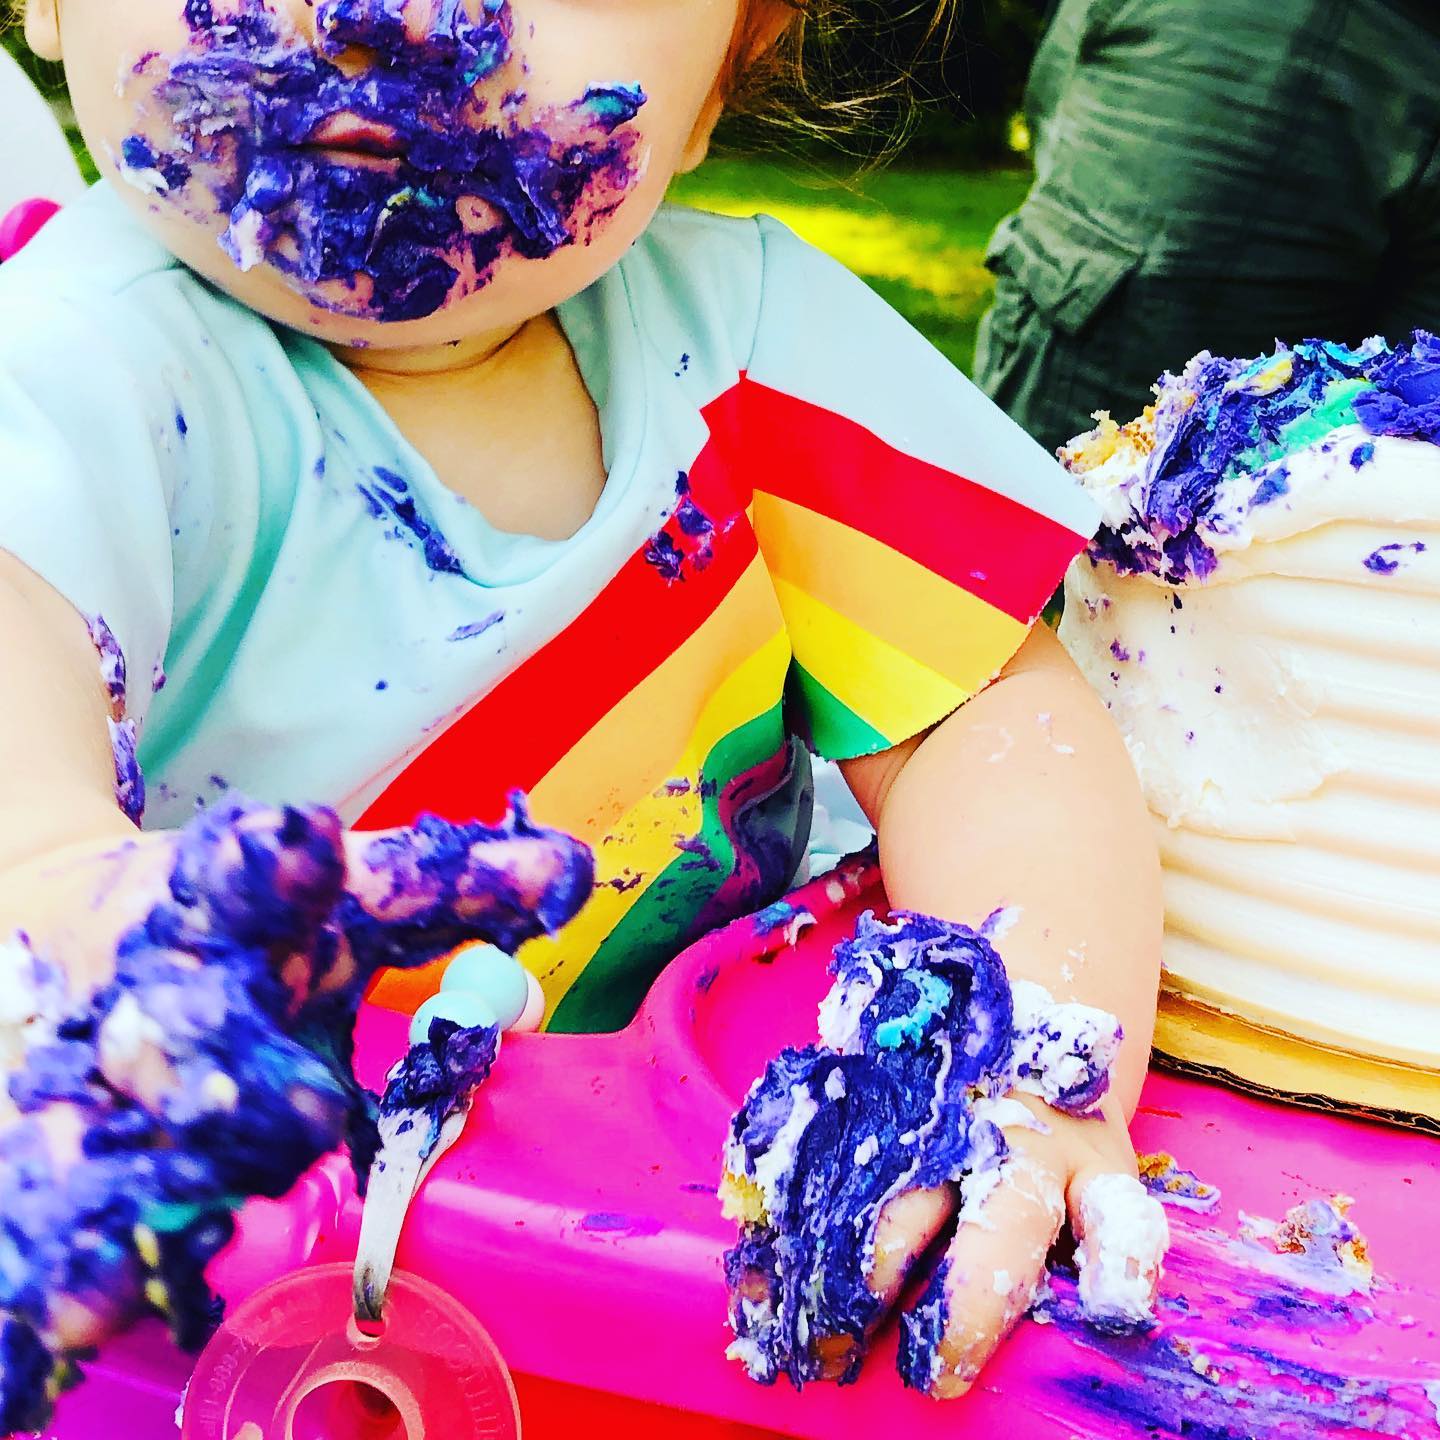 A baby covered in purple frosting from their first birthday cake. Photo by Instagram user @sensorytotspot.